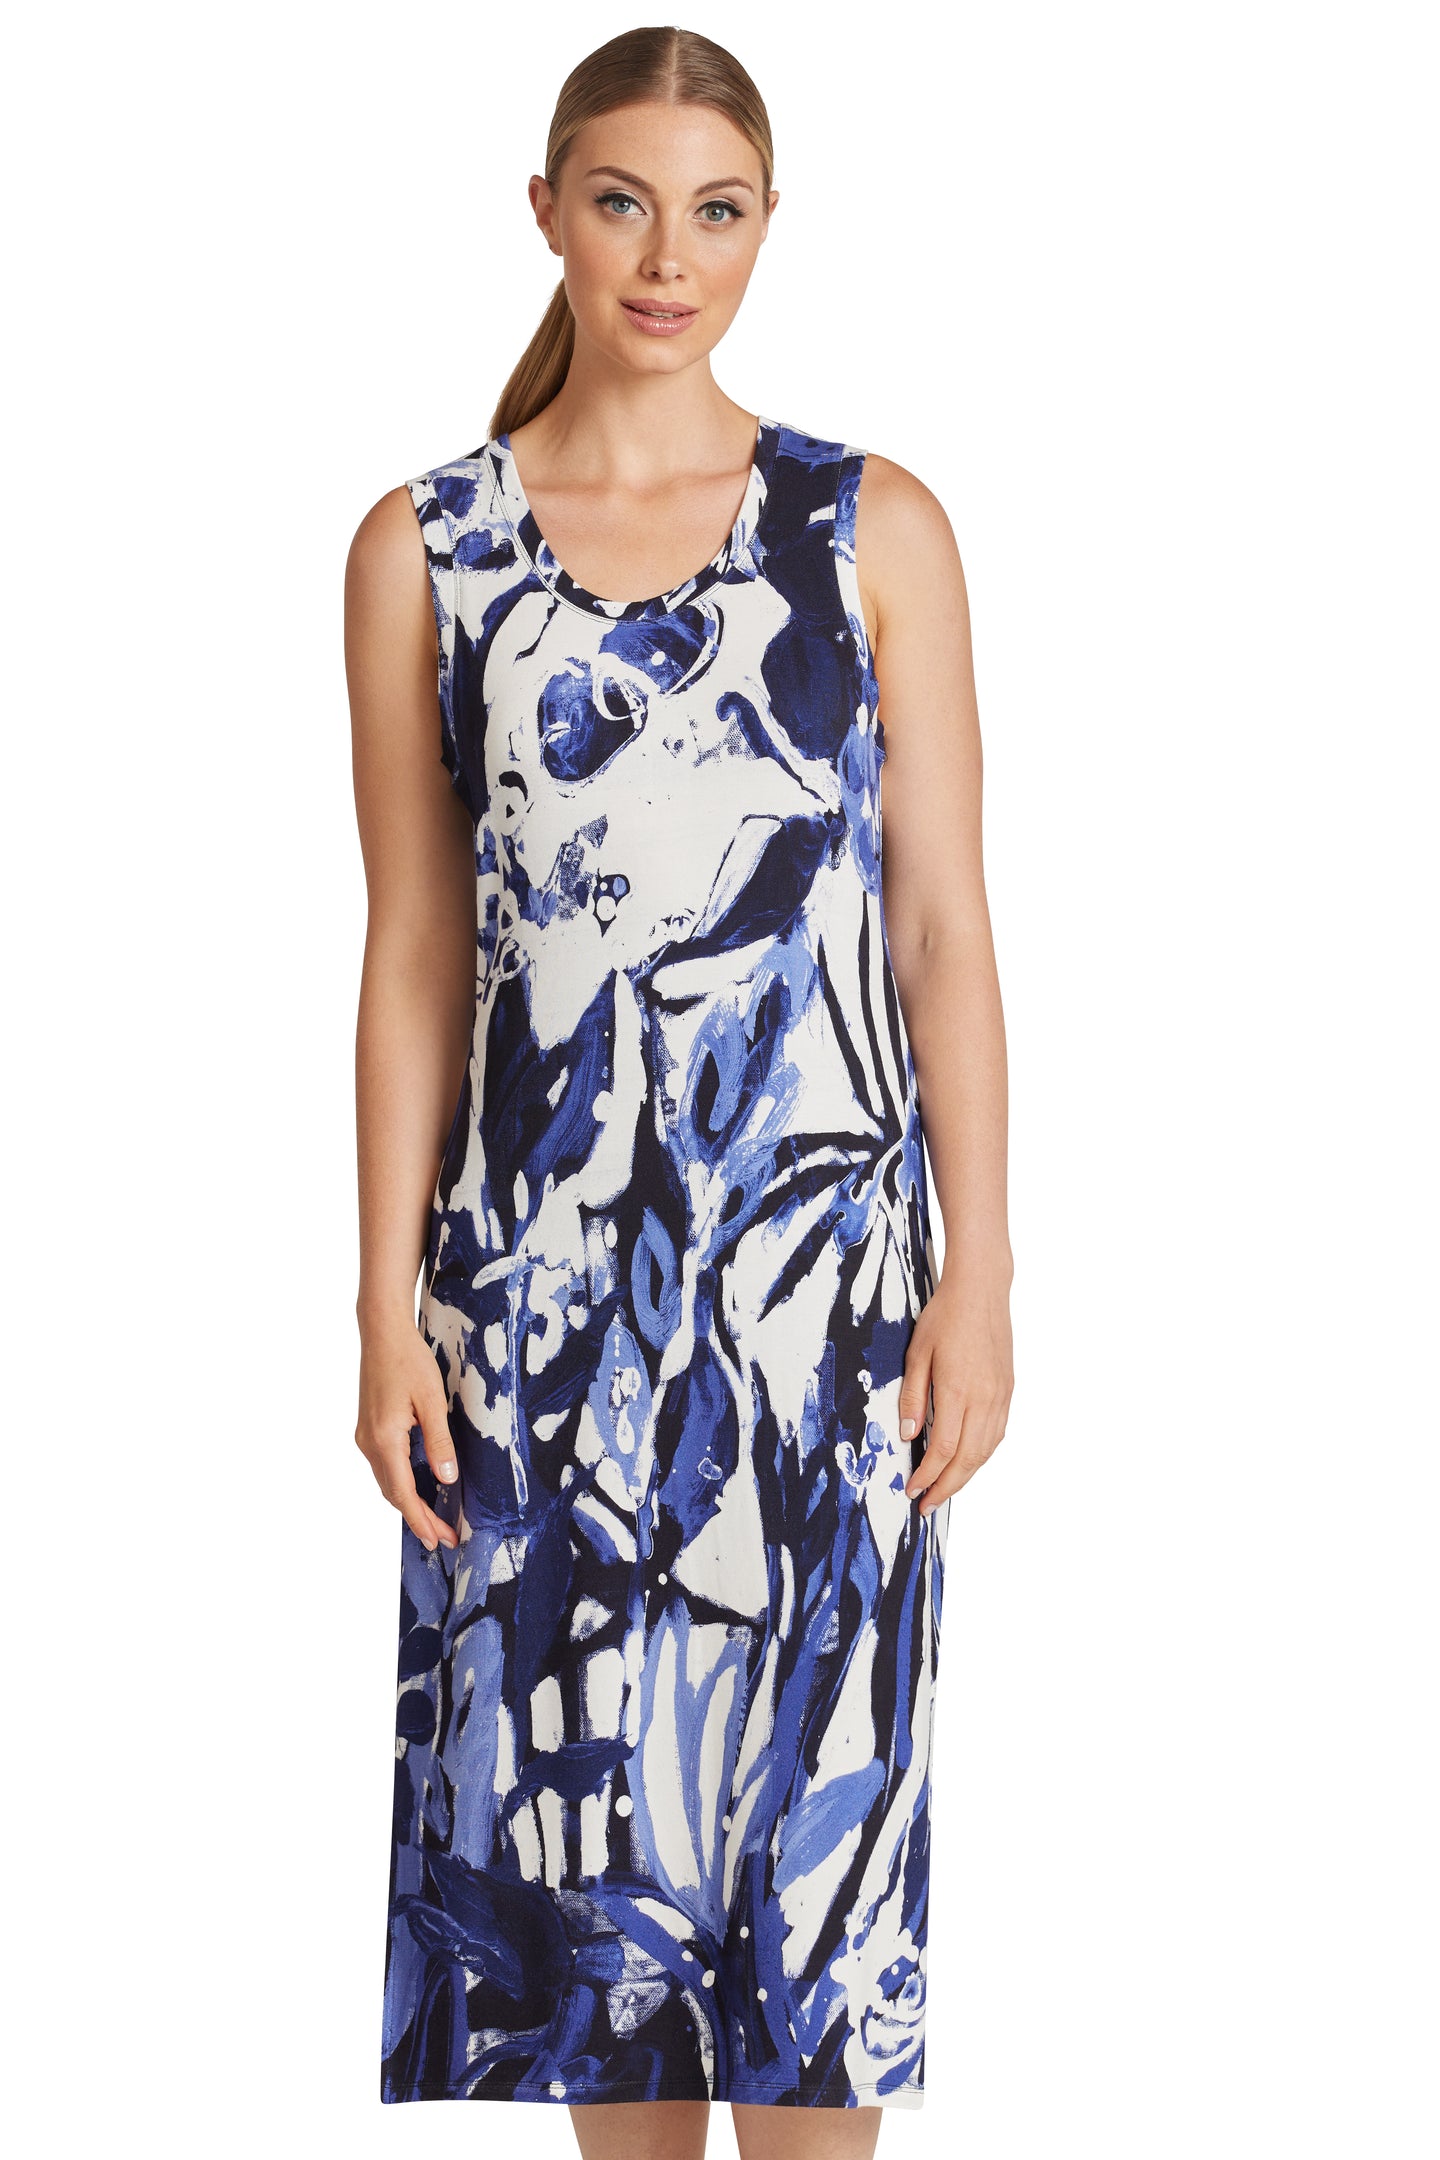 Blue & White: At Lib. sleeveless relaxed fit tank dress